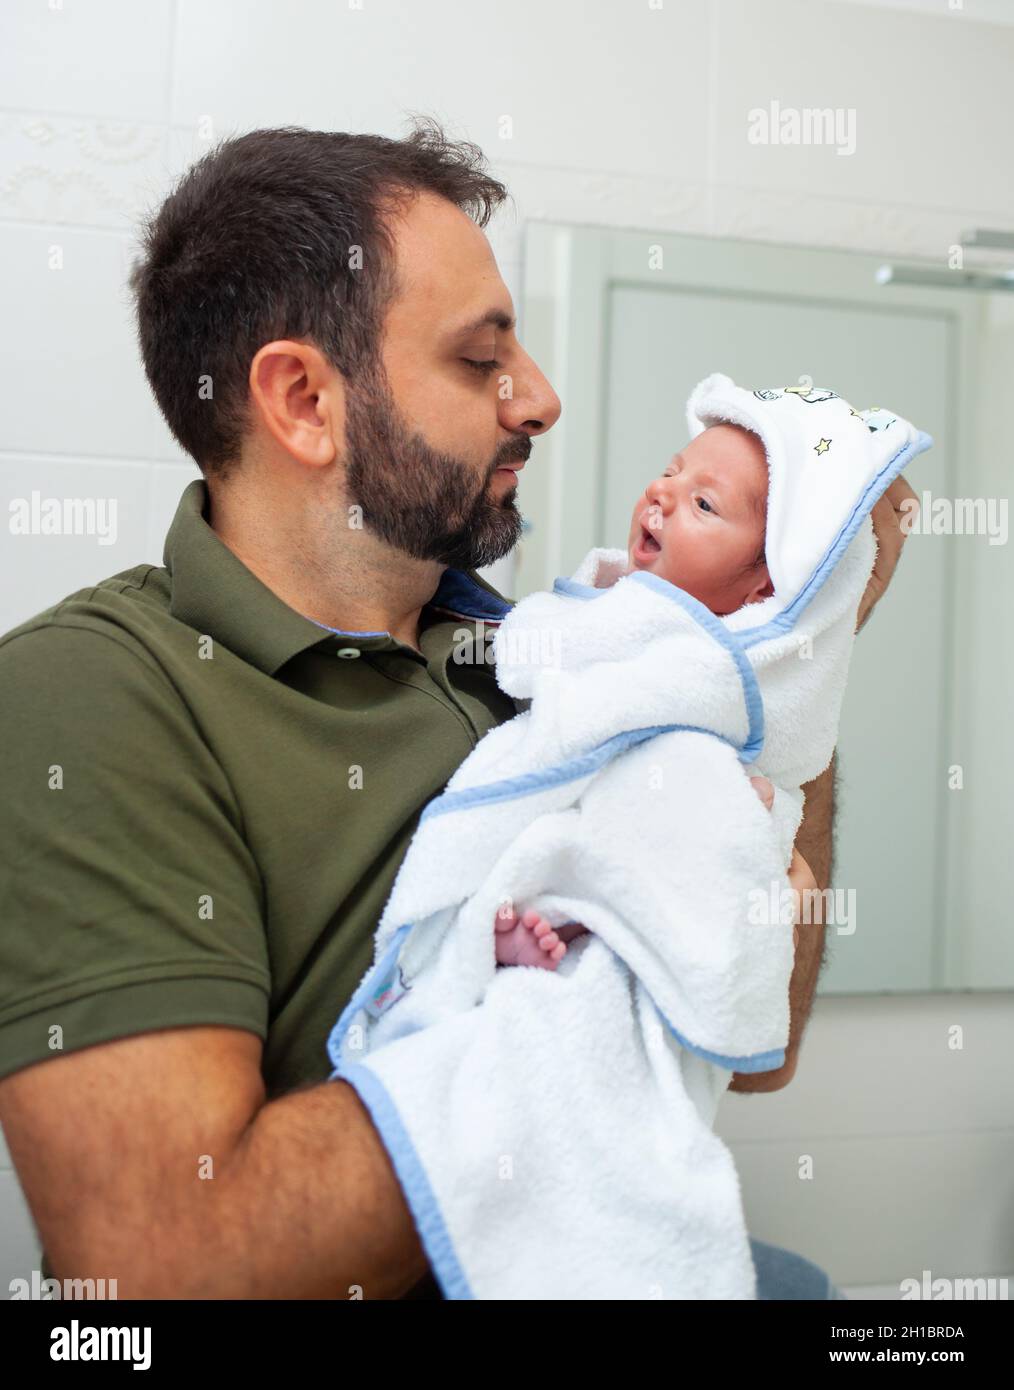 First bath of newborn baby boy. The baby is in the bathrobe in his father's arms. Stock Photo